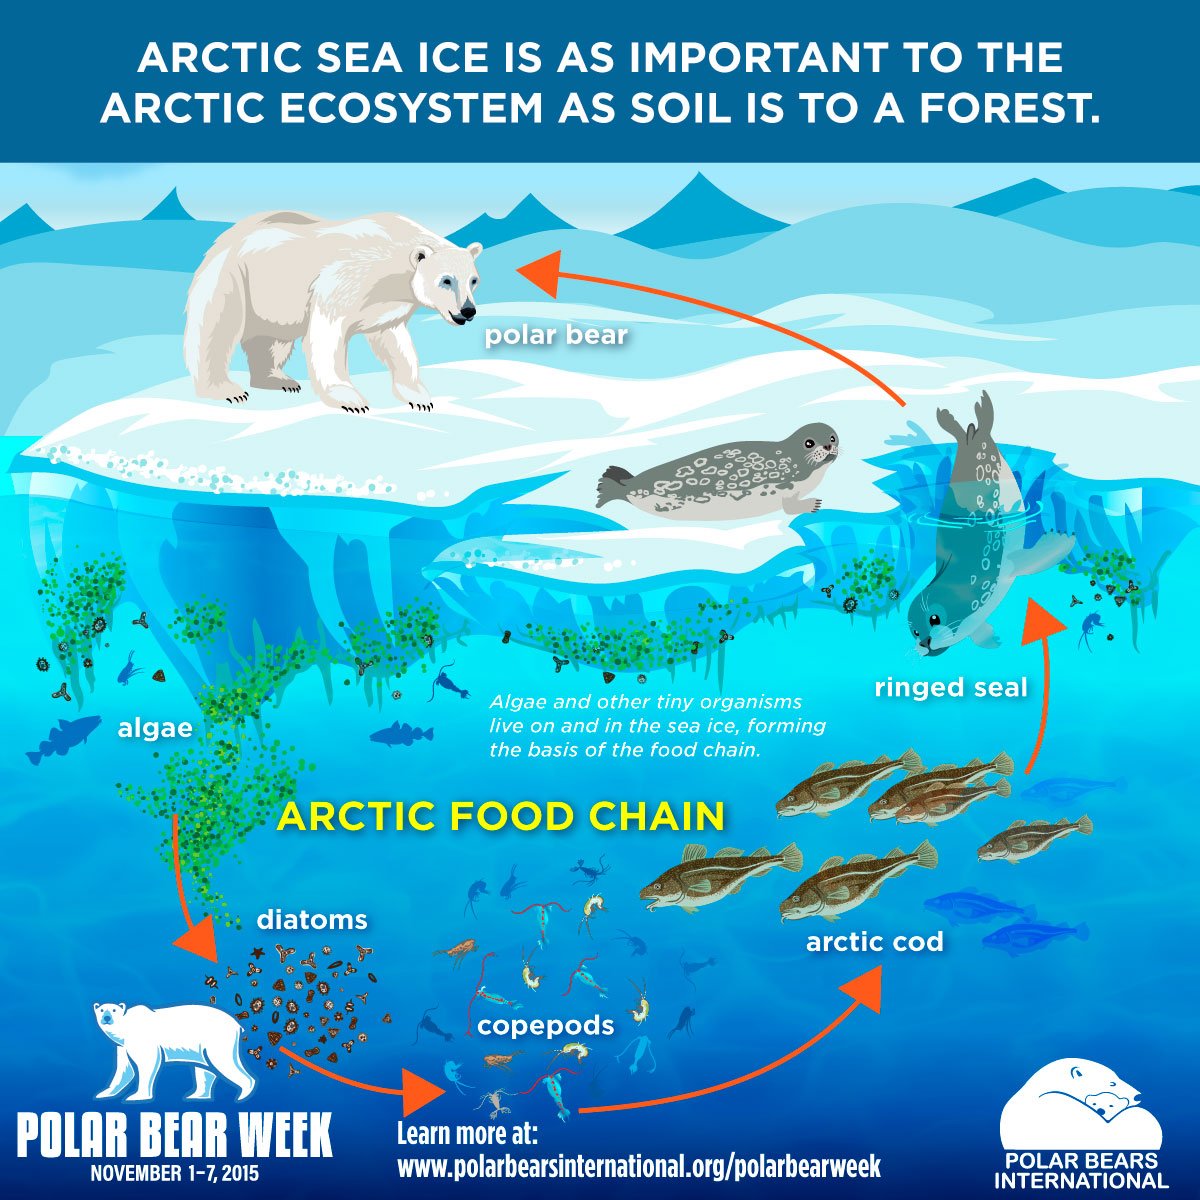 HuffPost Green on Twitter: "This is why the Arctic sea ice is so important.  https://t.co/344U68Oz3N"